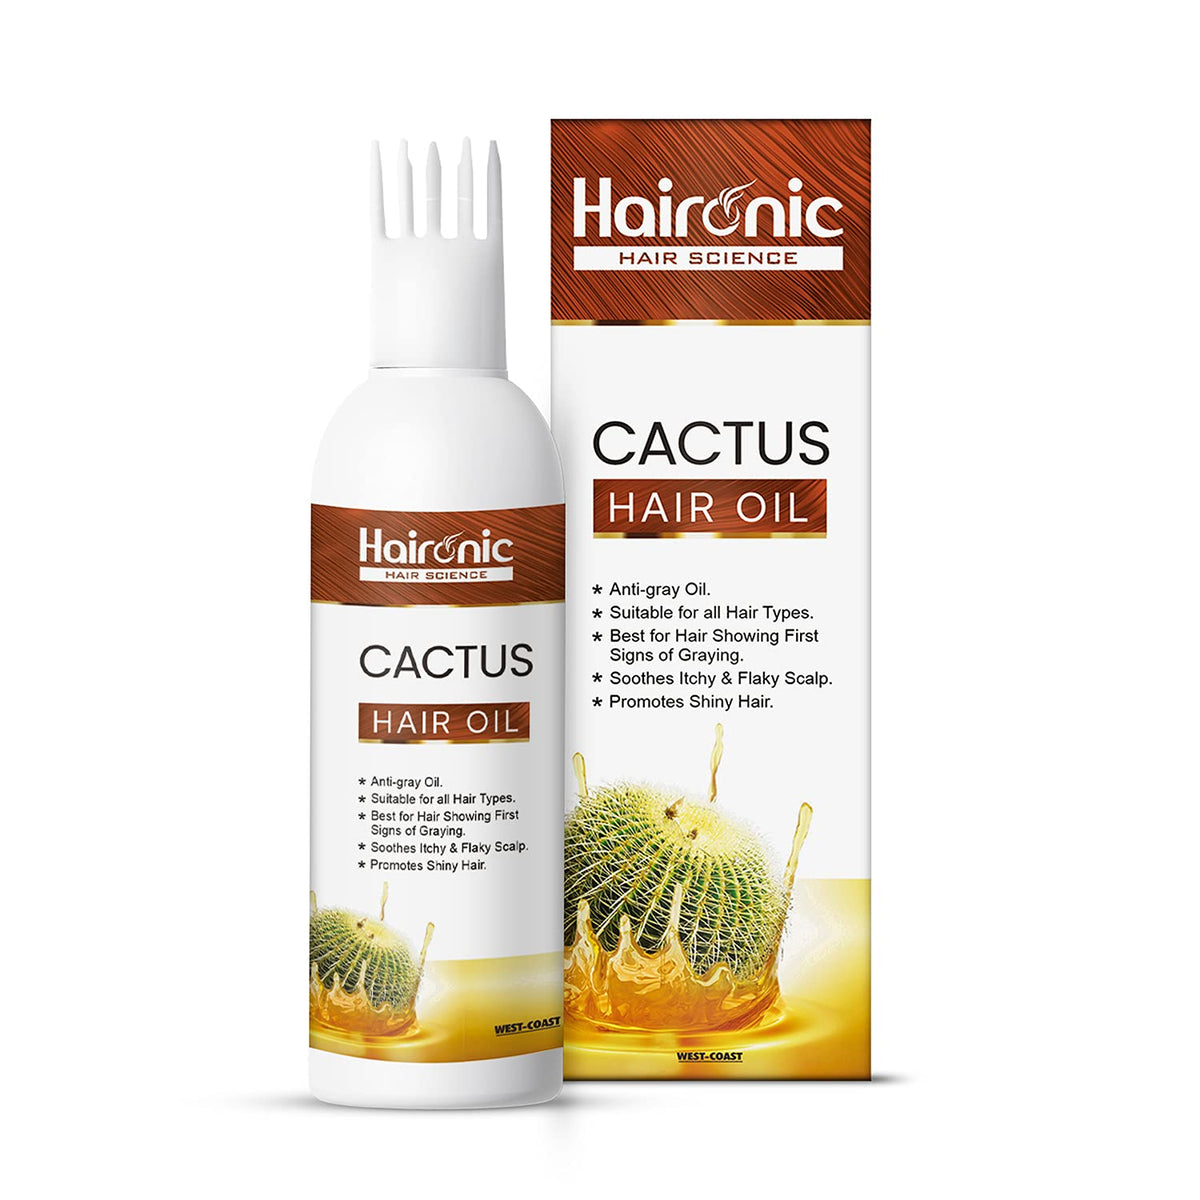 Haironic Hair Science Cactus Hair Oil | Promotes Shiny Hair |Non-Sticky & Suitable for All Hair Types – 100ml (Pack of 5)